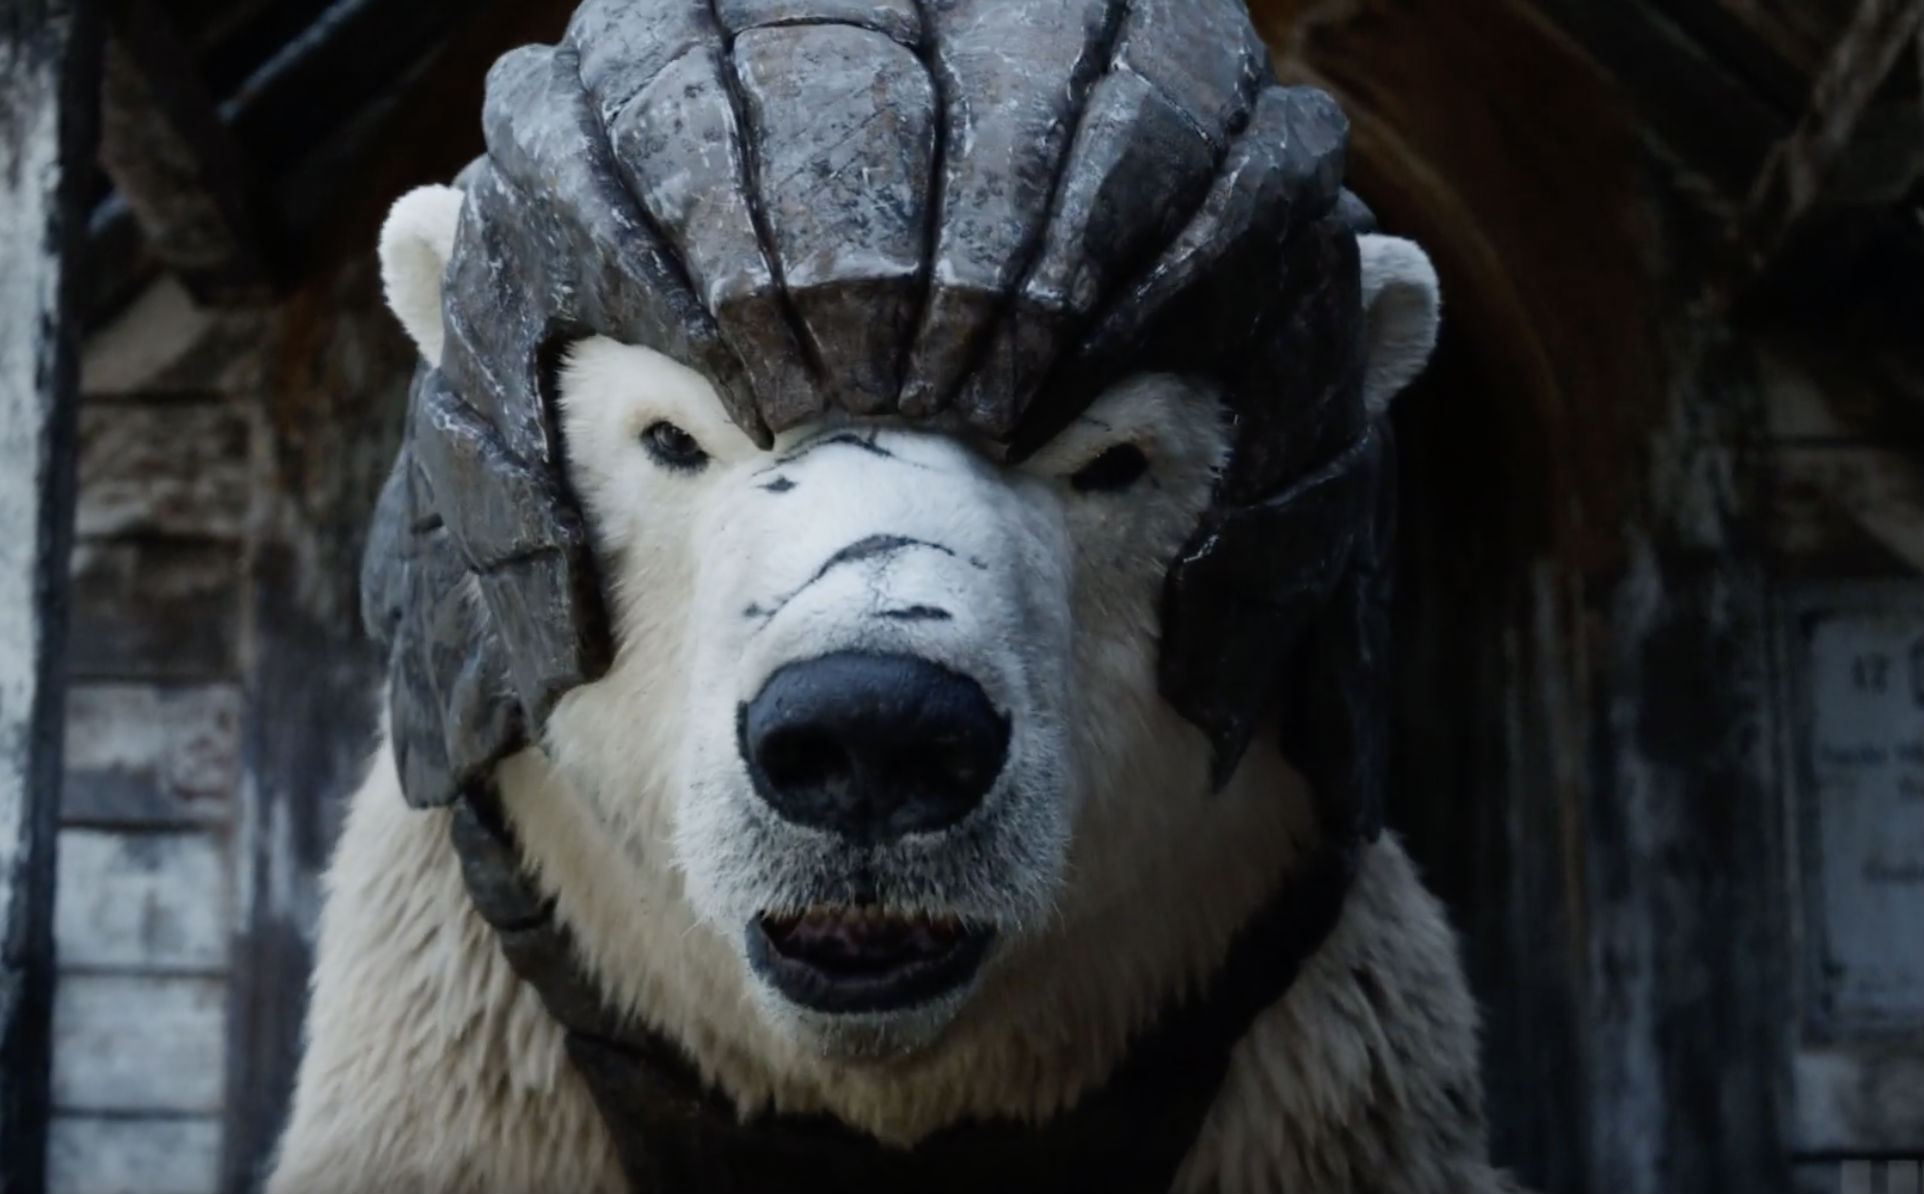 His Dark Materials Trailer Brings The Fantasy Epic To Life | SDCC 2019